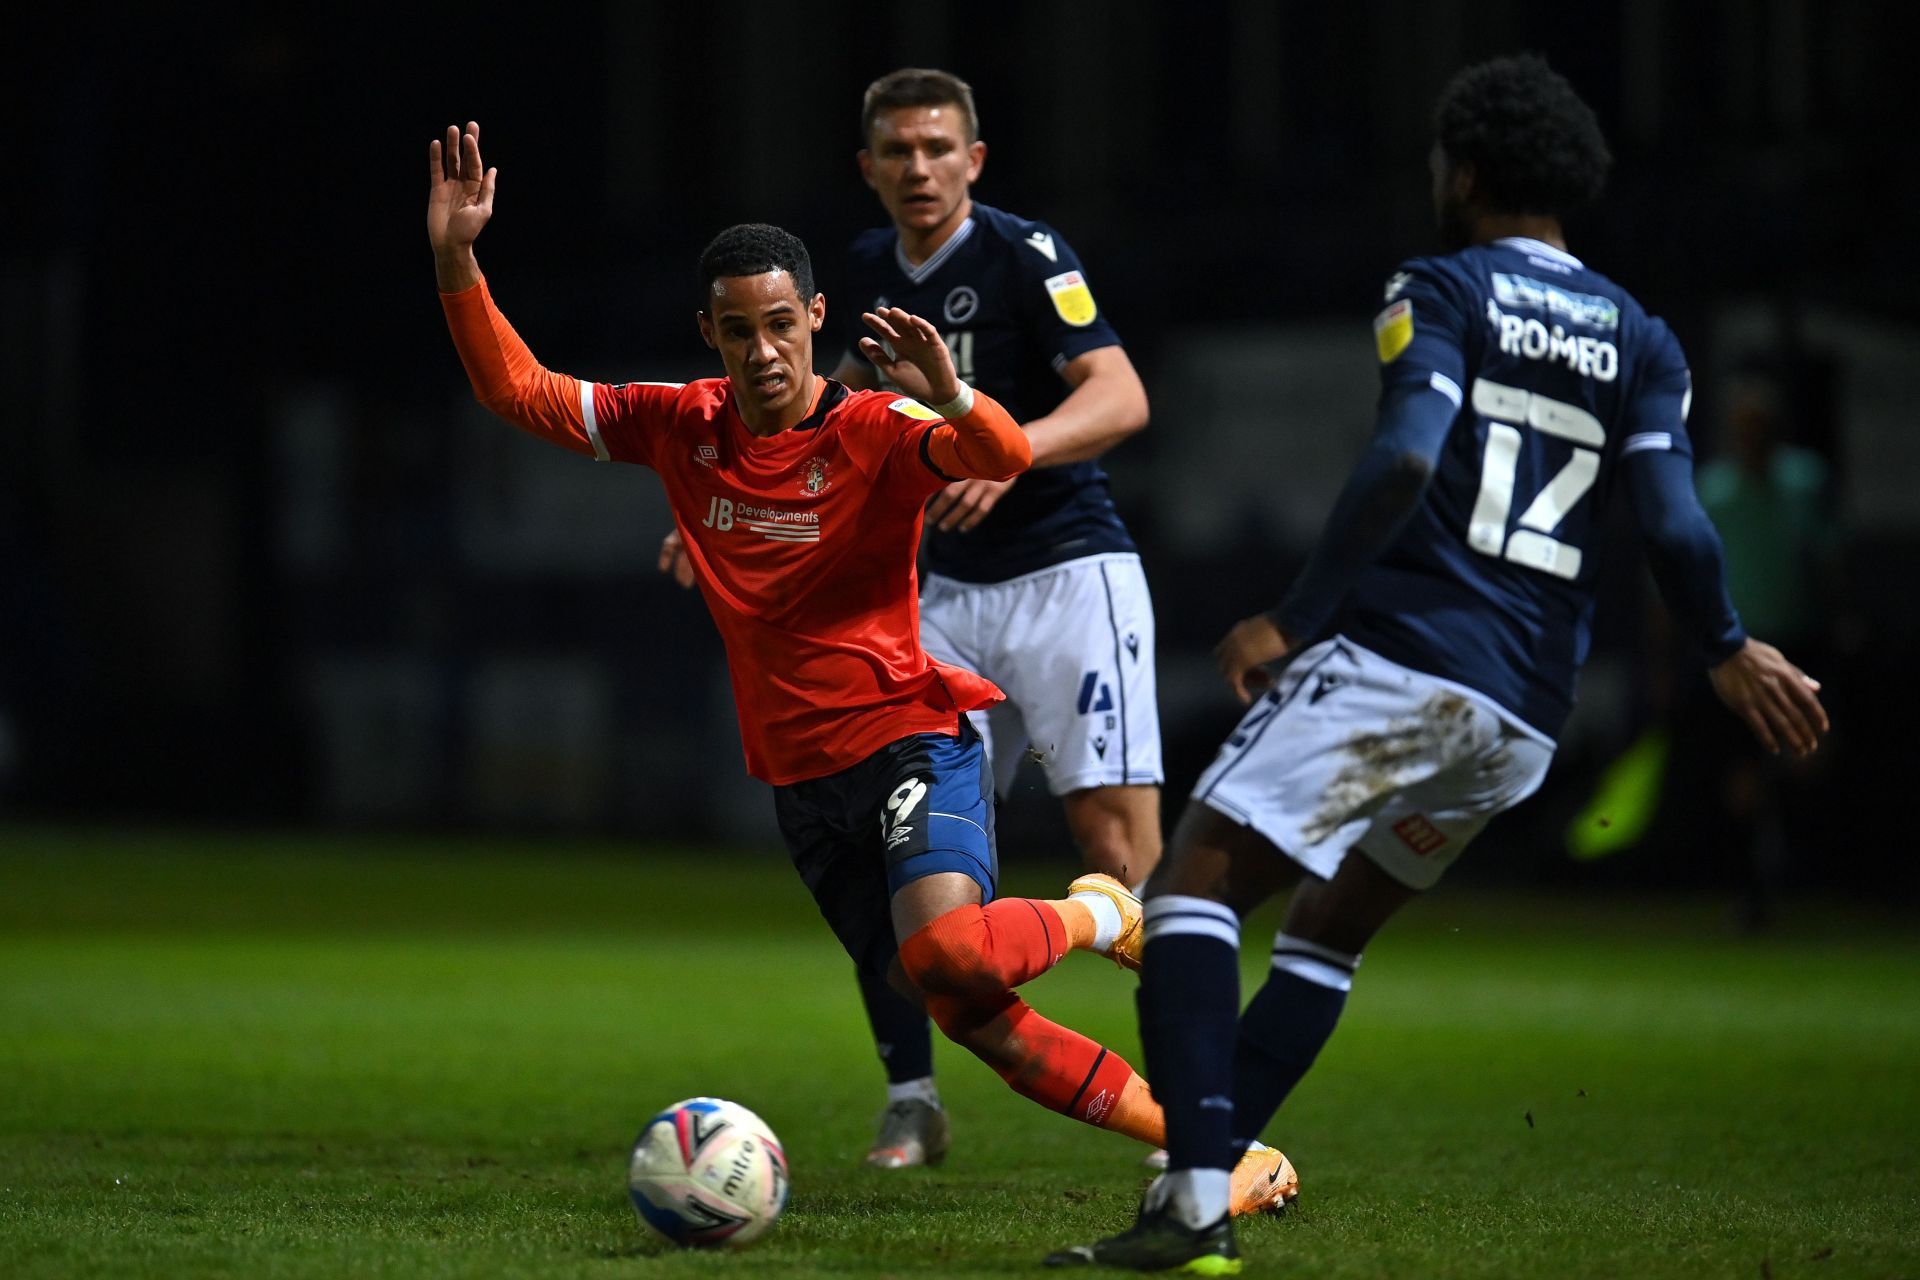 Luton are looking for a league double over Millwall